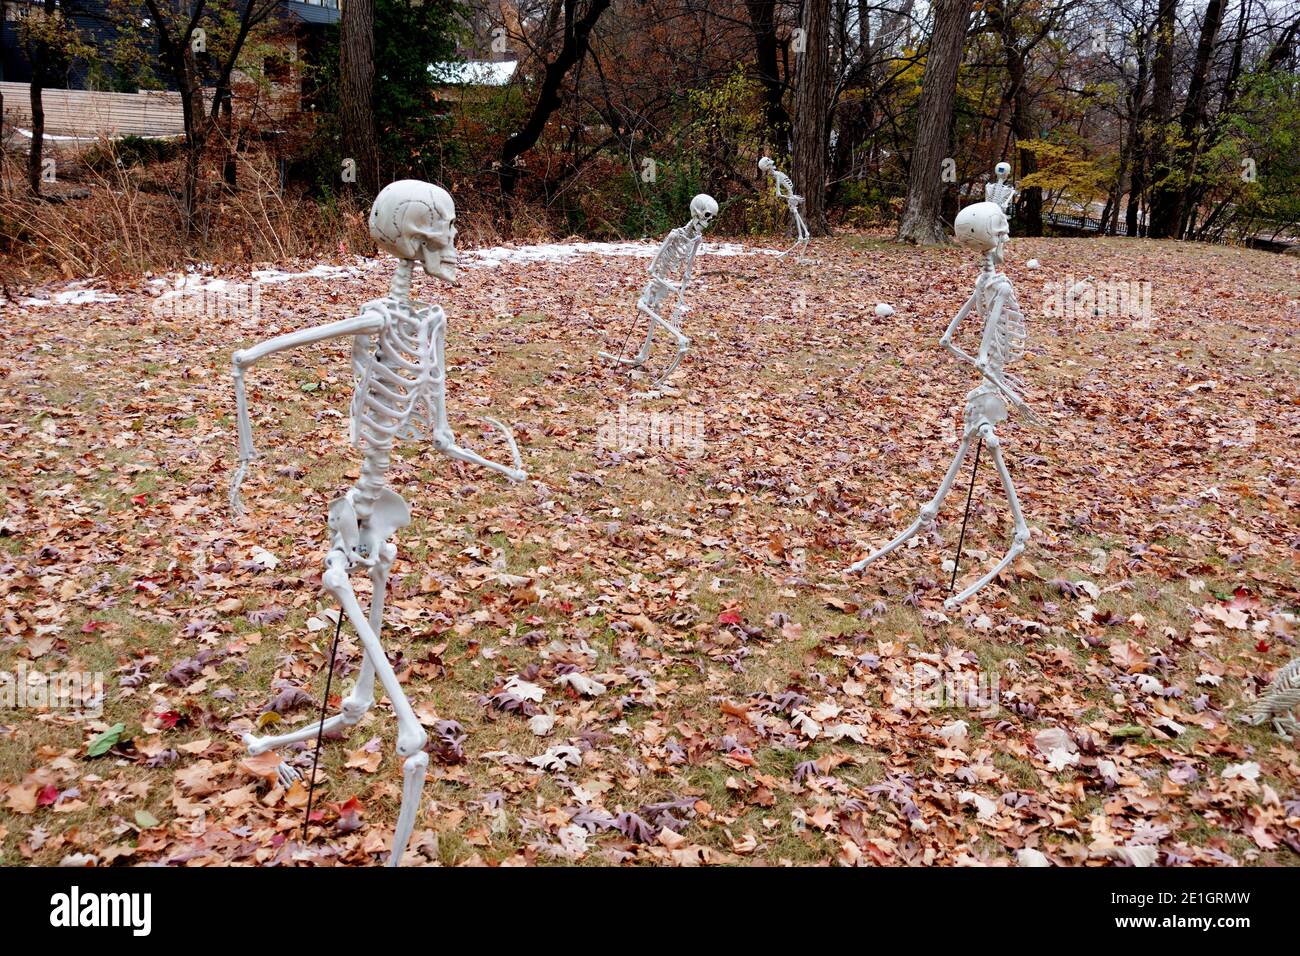 Five skeleton dancing in yard filled with autumn leaves for Halloween. Glad I wasn't there that night. St Paul Minnesota MN USA Stock Photo